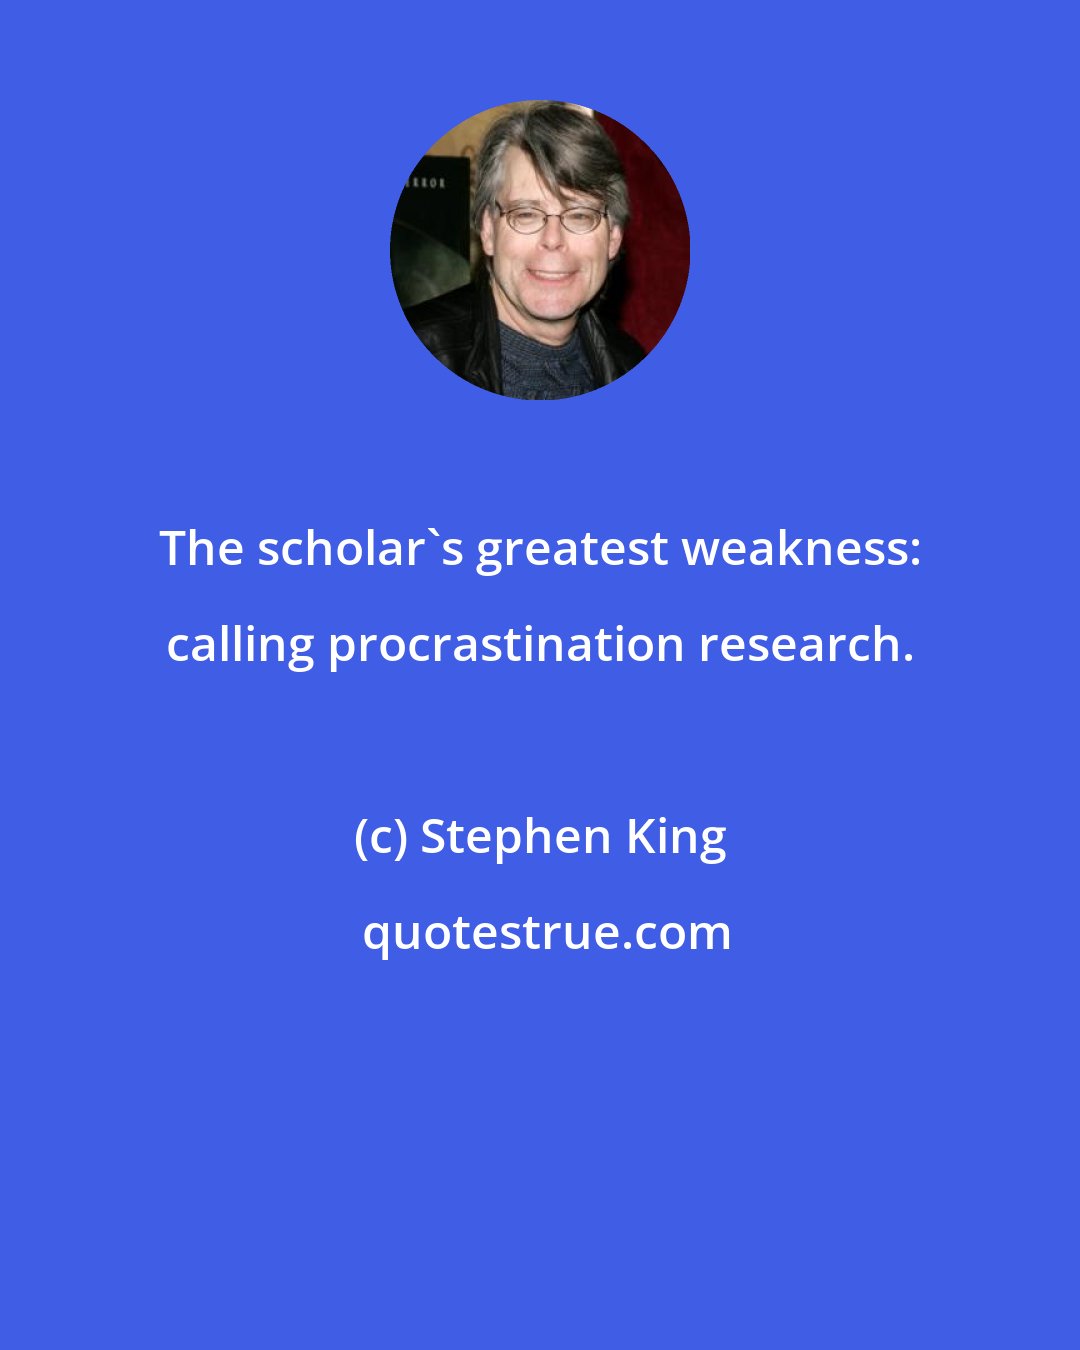 Stephen King: The scholar's greatest weakness: calling procrastination research.